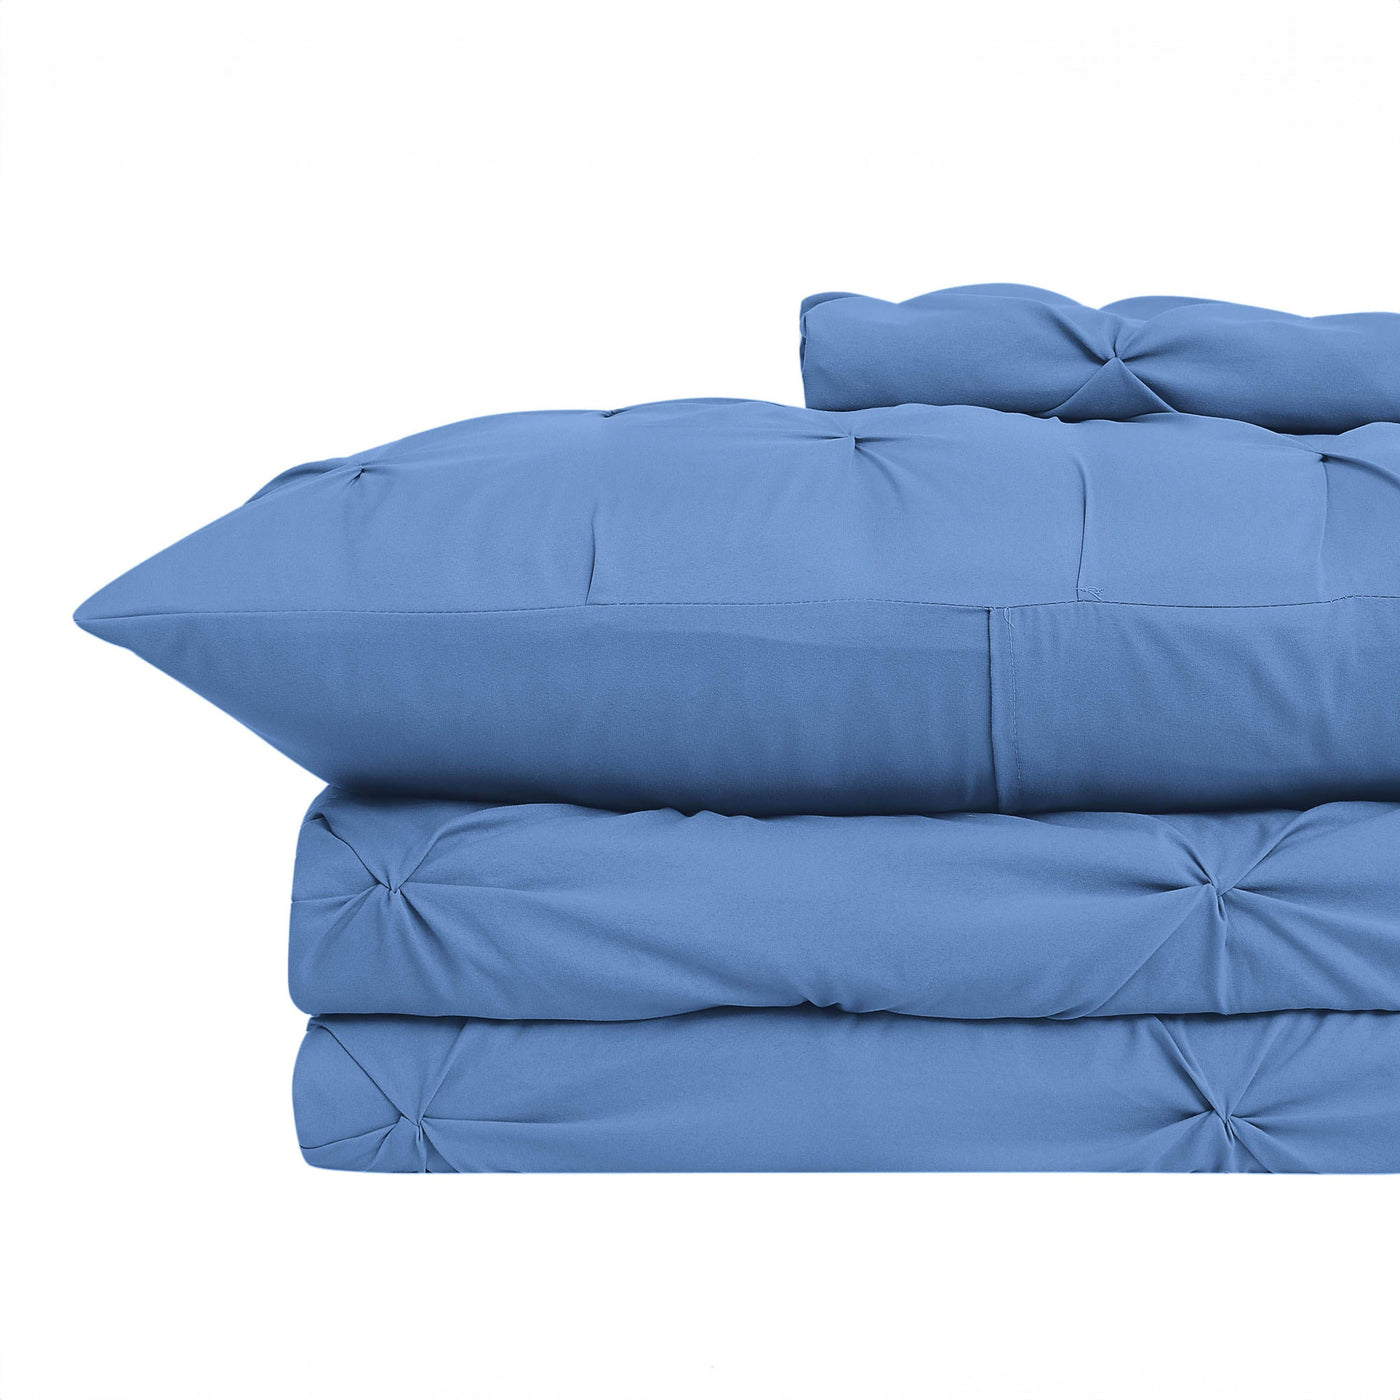 Stack Image of Pintuck Pinch Pleated Duvet Cover Set in Coronet Blue#color_vilano-coronet-blue